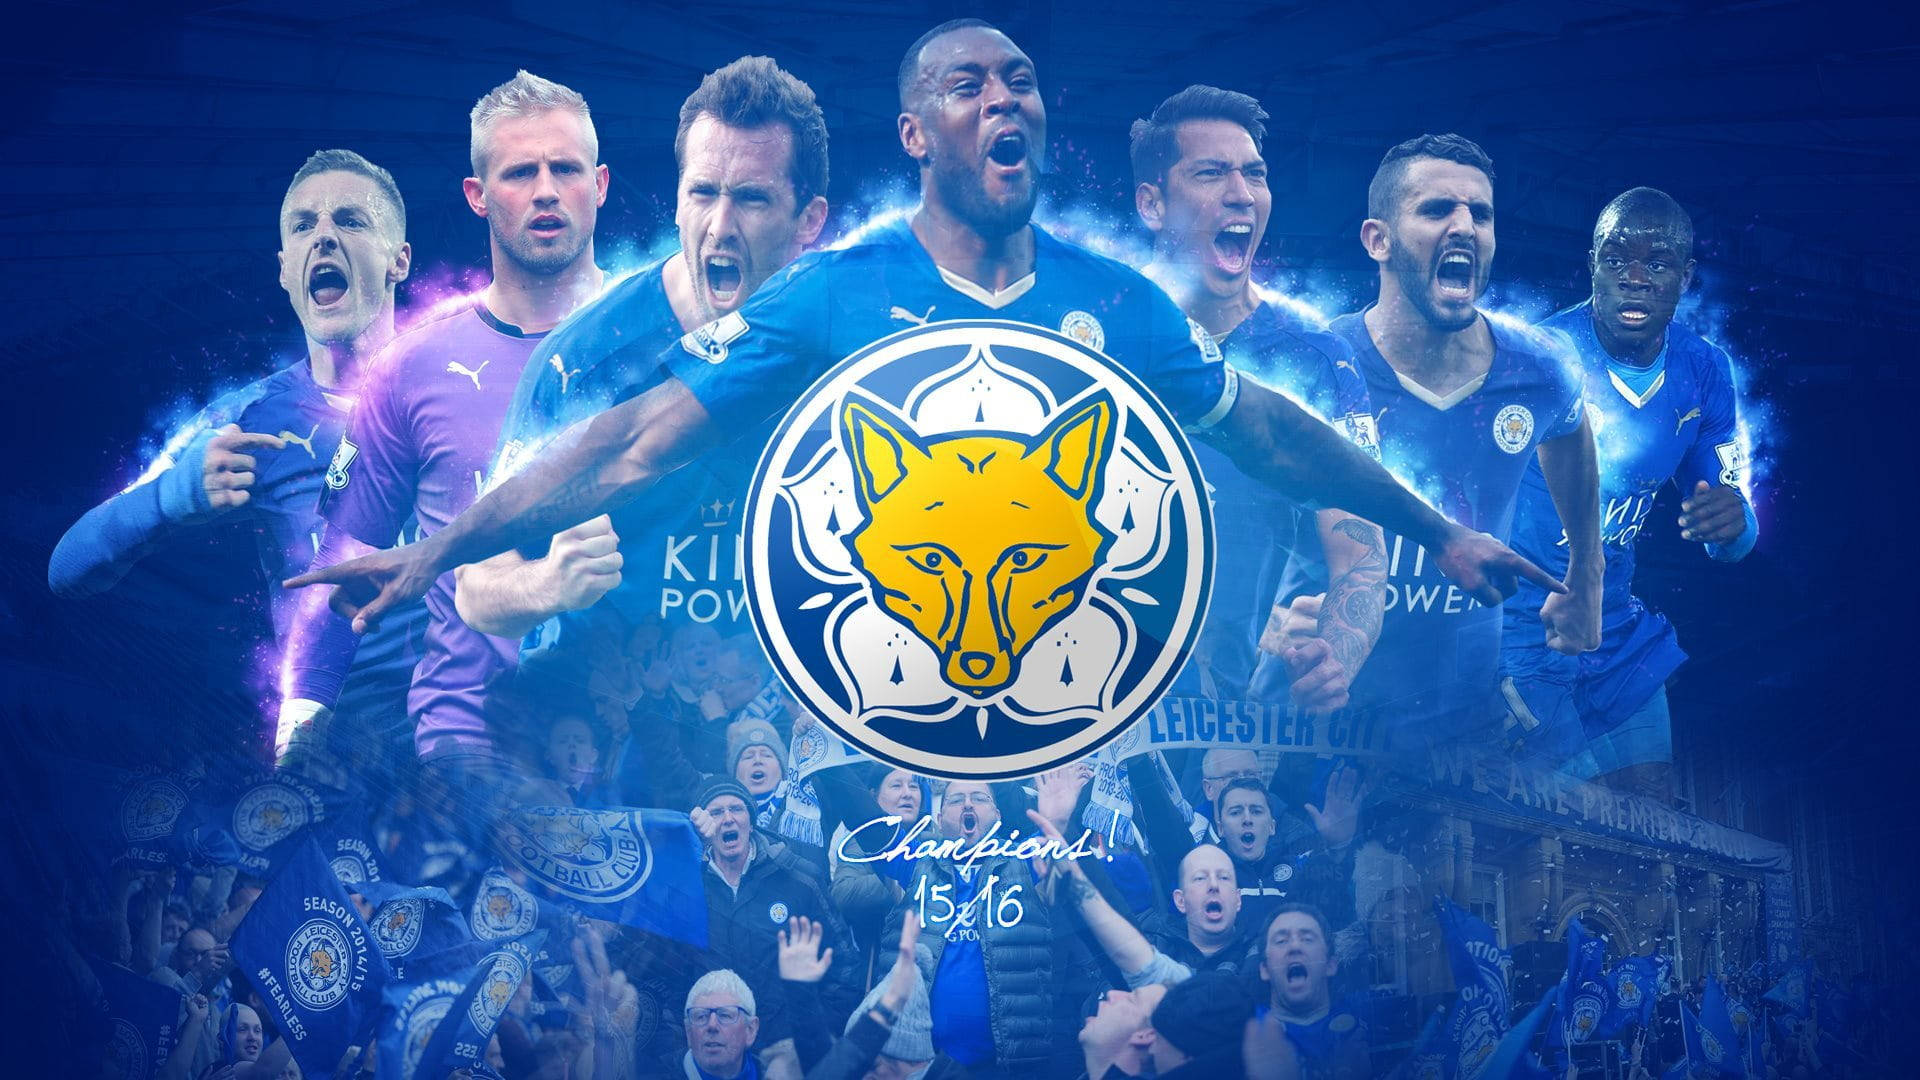 Jamie Vardy Champions 2016 Leicester Wallpaper